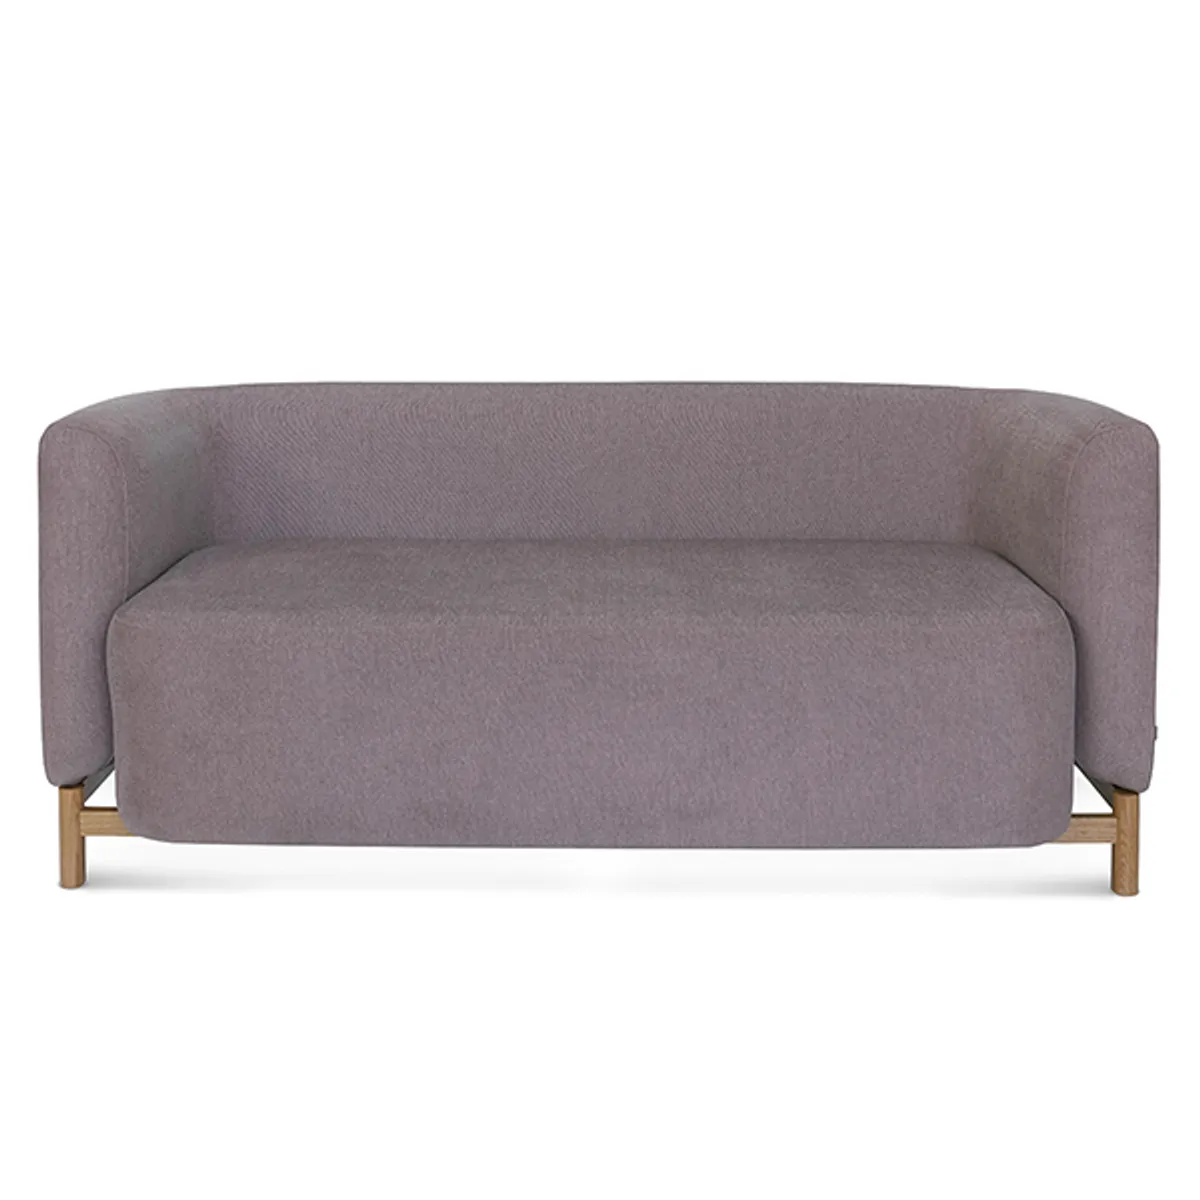 Roberta Sofa Upholstered Hotel Furniture With Wooden Legs Insideoutcontracts 020